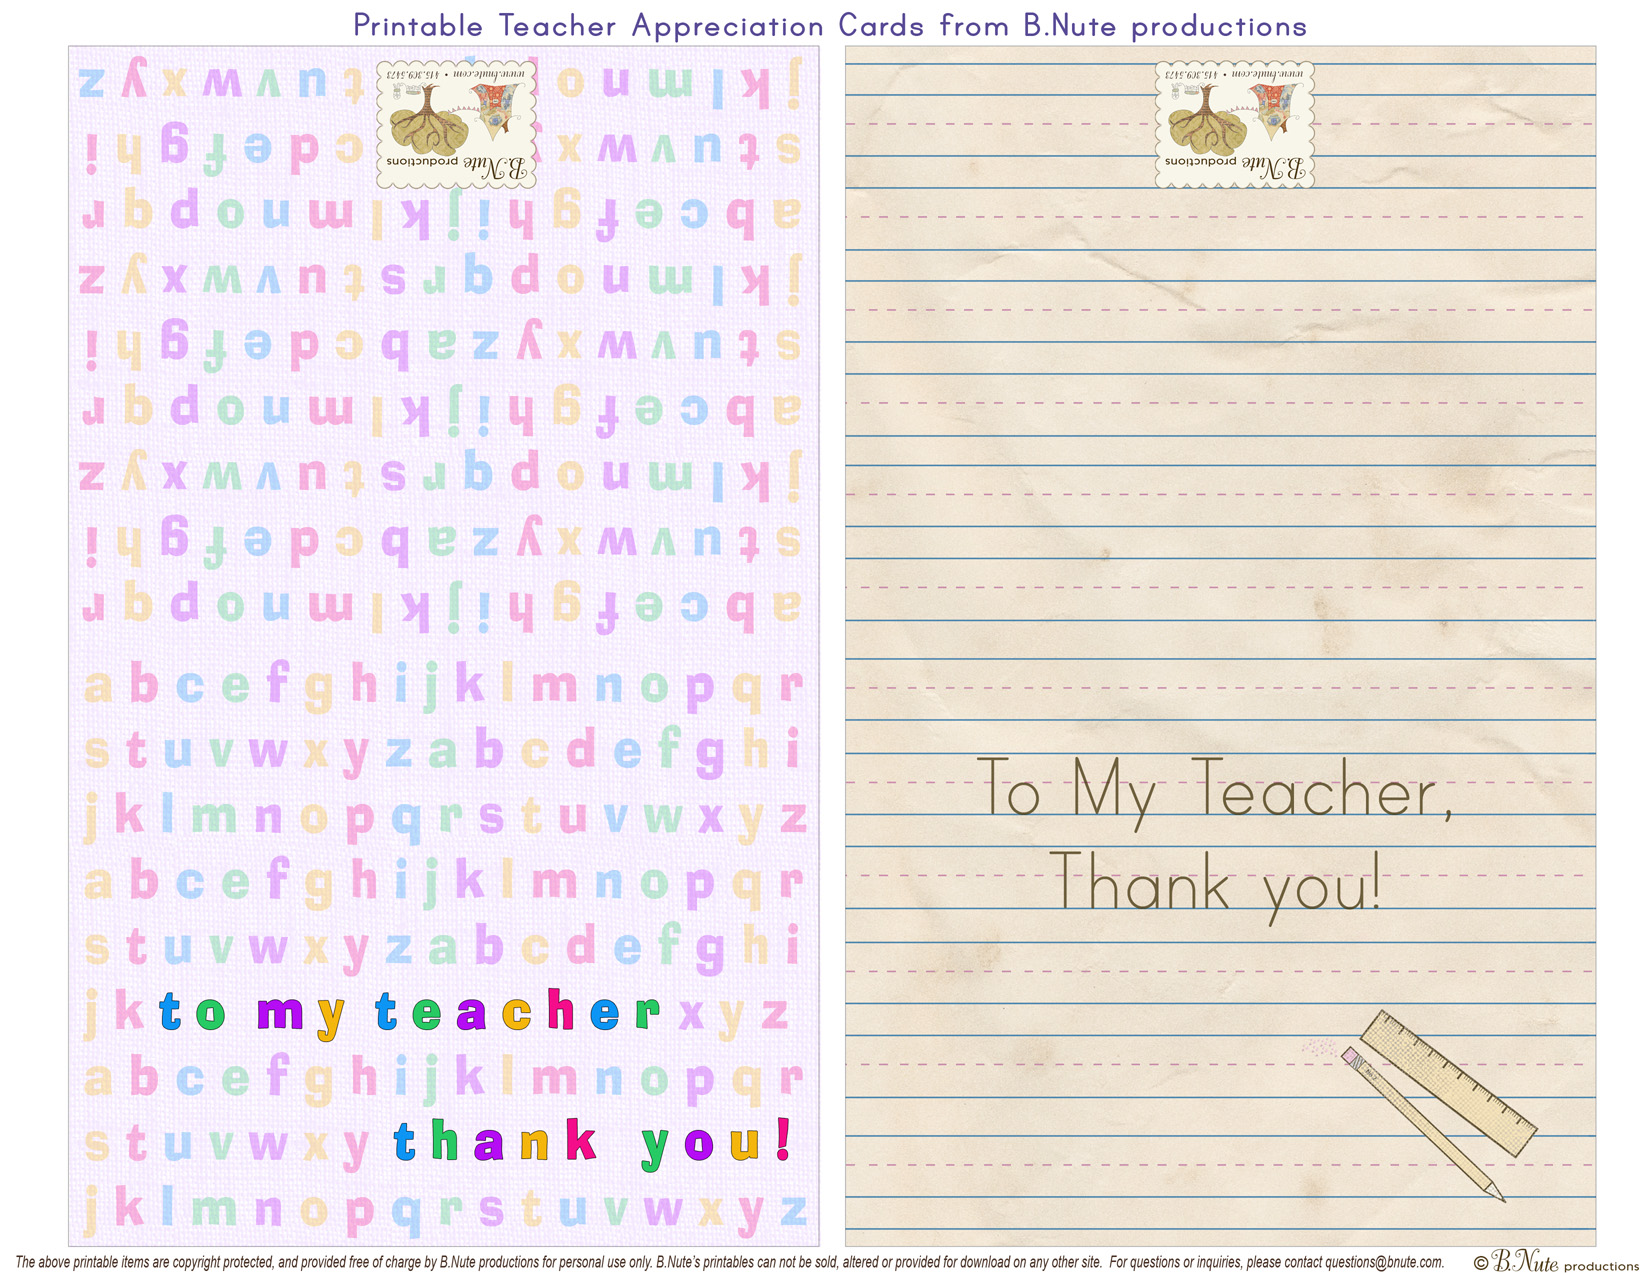 bnute productions: Free Printable Teacher Appreciation Cards